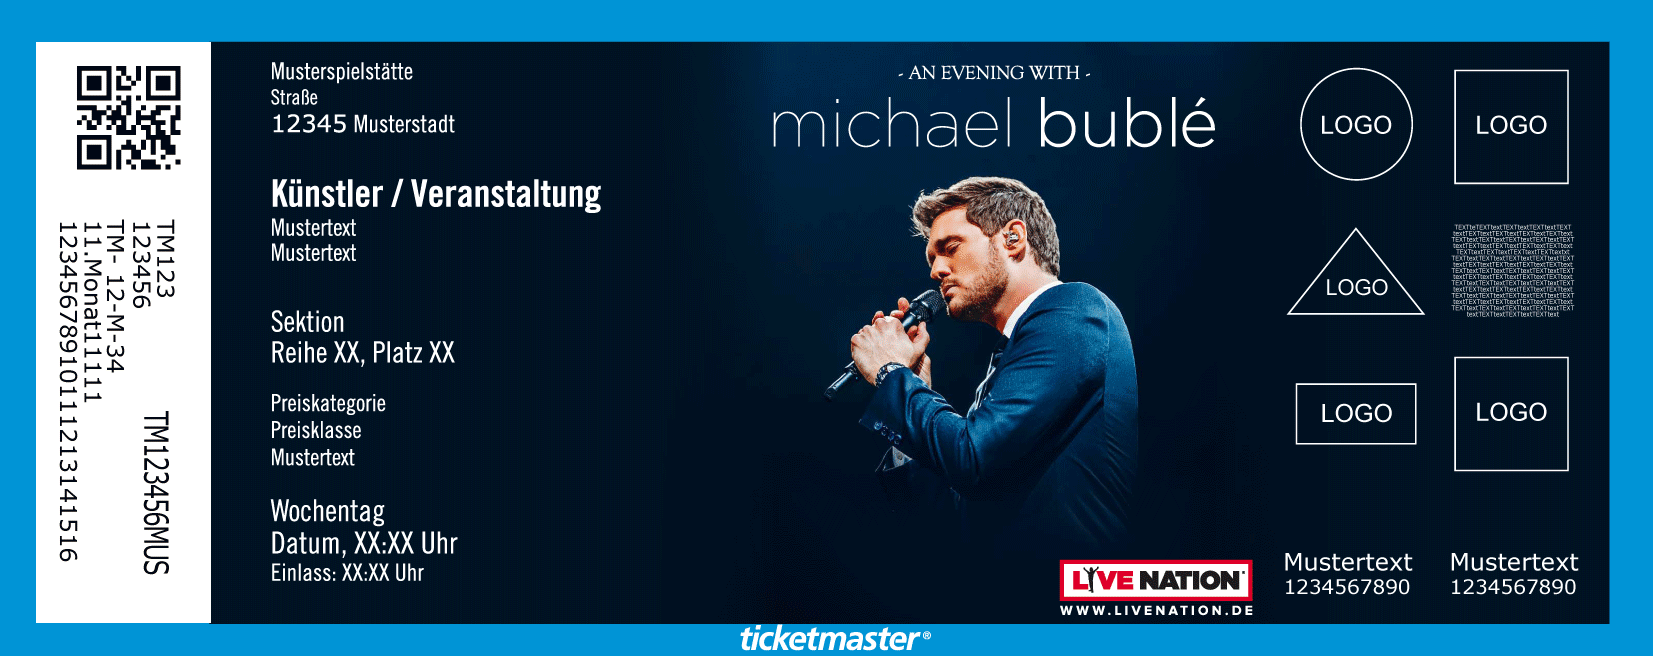 Michael Buble 2019 Tickets